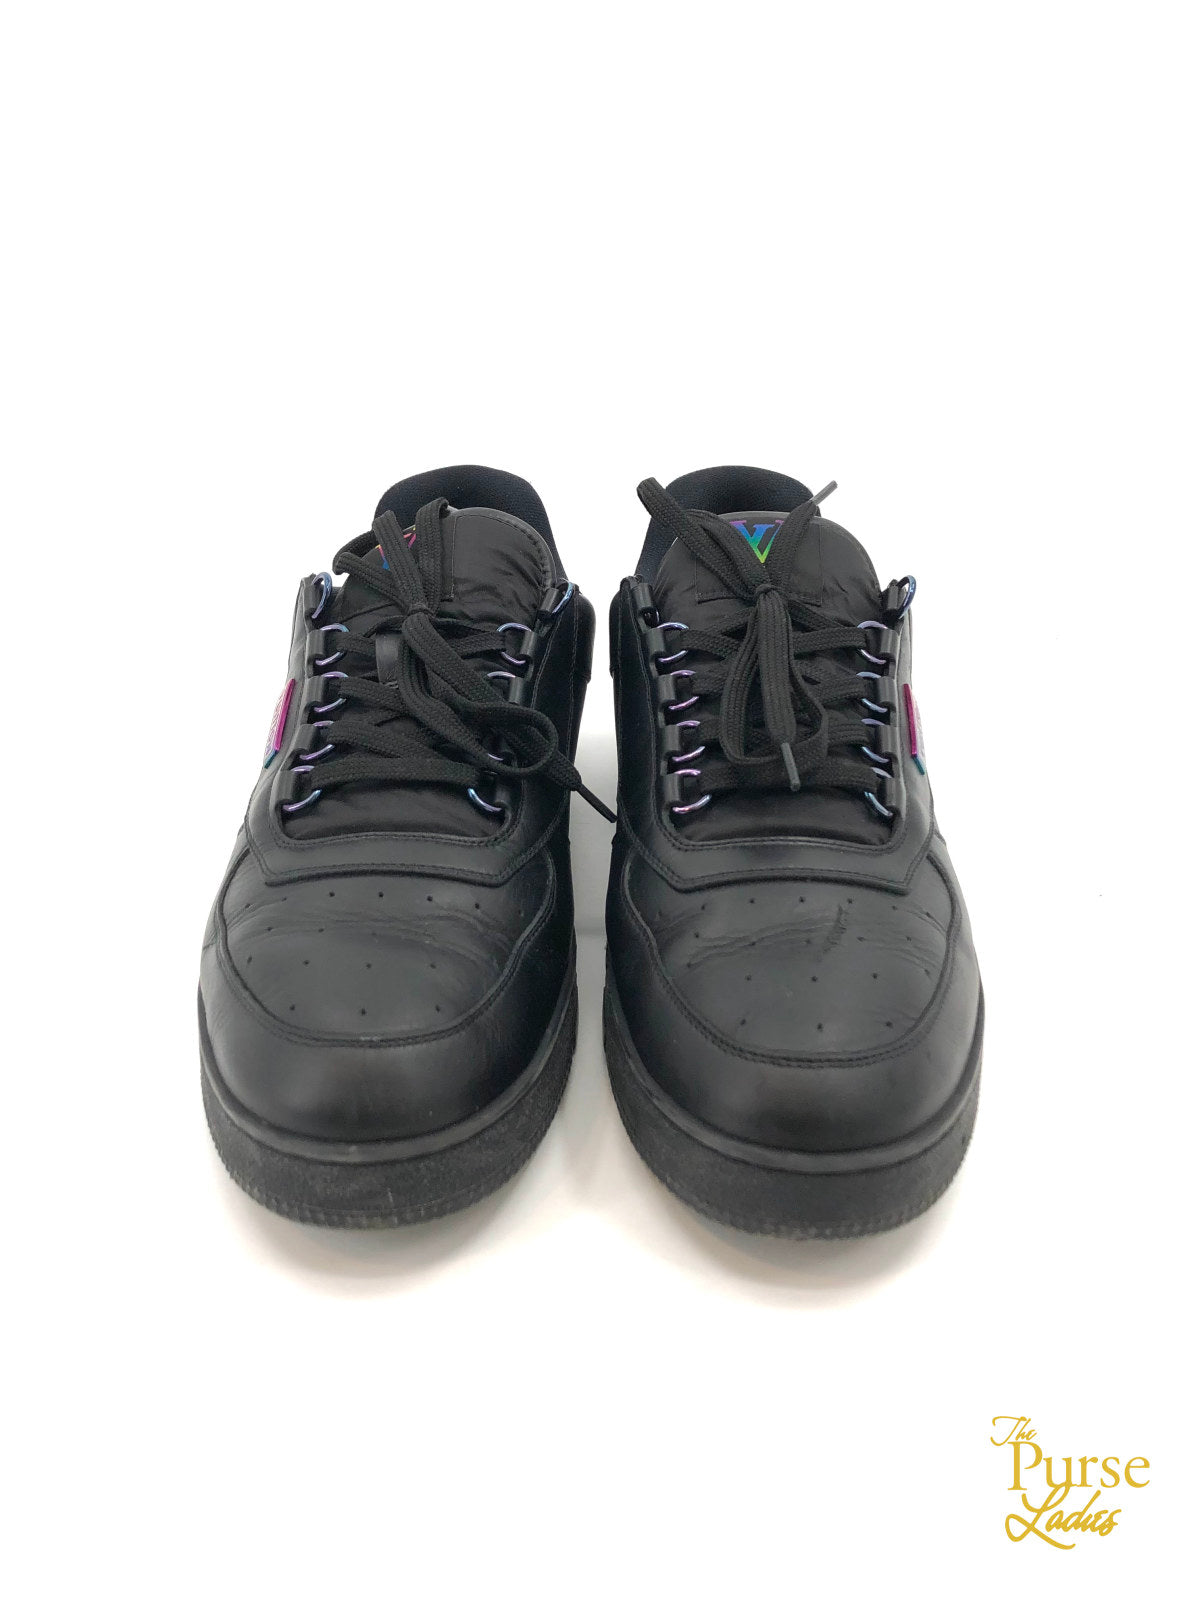 Lv trainer leather trainers Louis Vuitton Black size 9.5 UK in Leather -  33039959